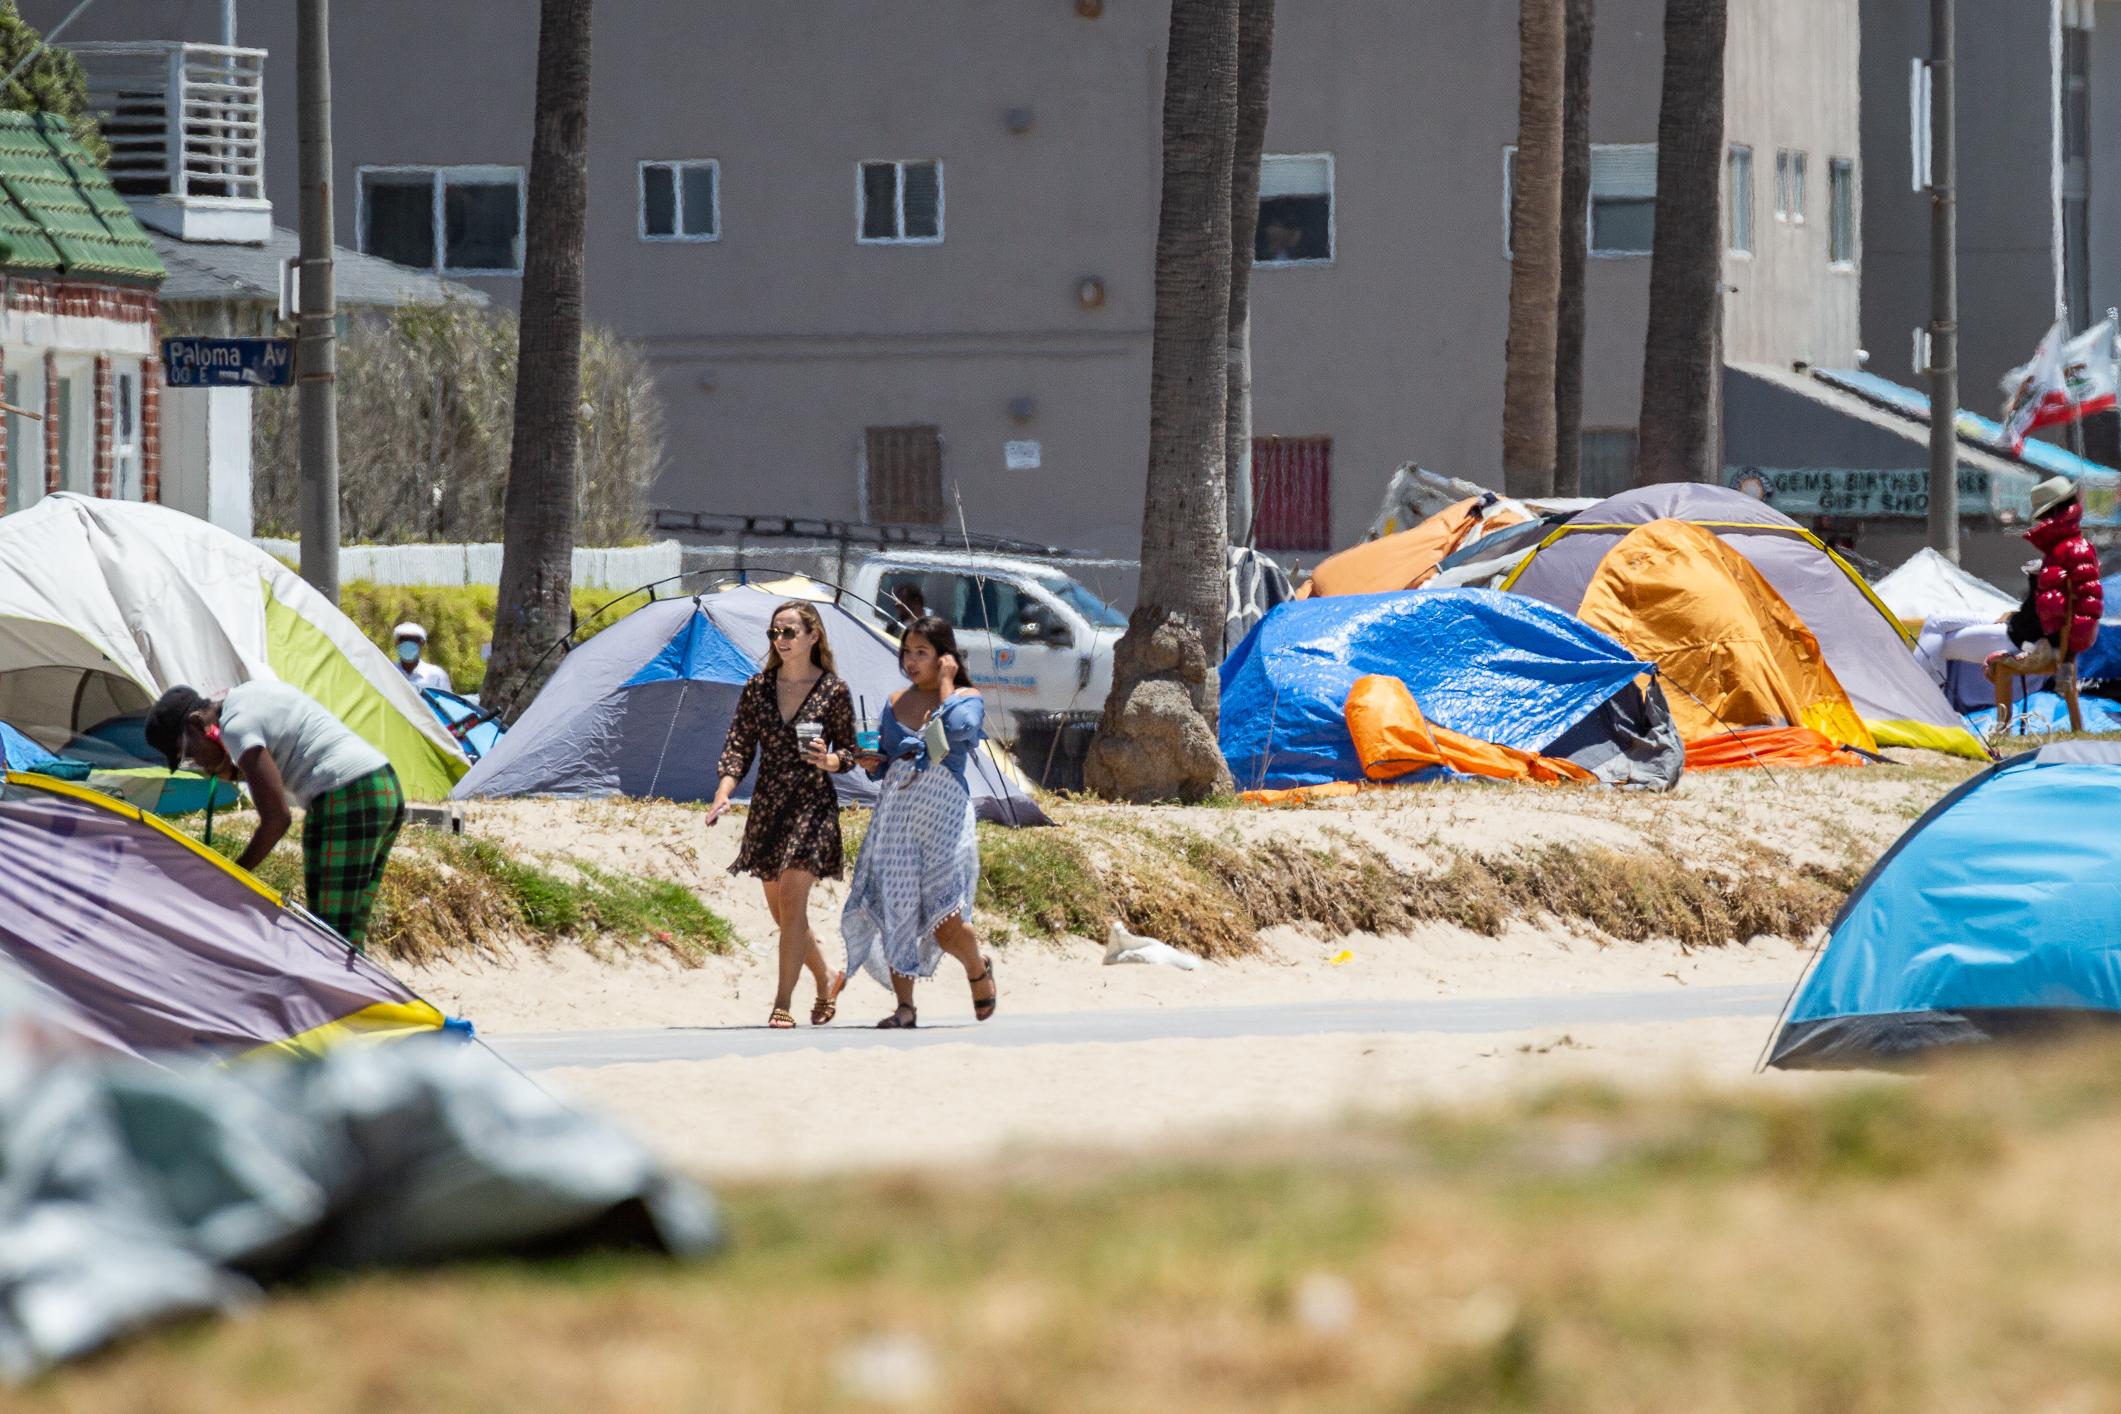 California Mayors Ask for $1.5 Billion to Help Homeless Suffering From Mental Health Issues